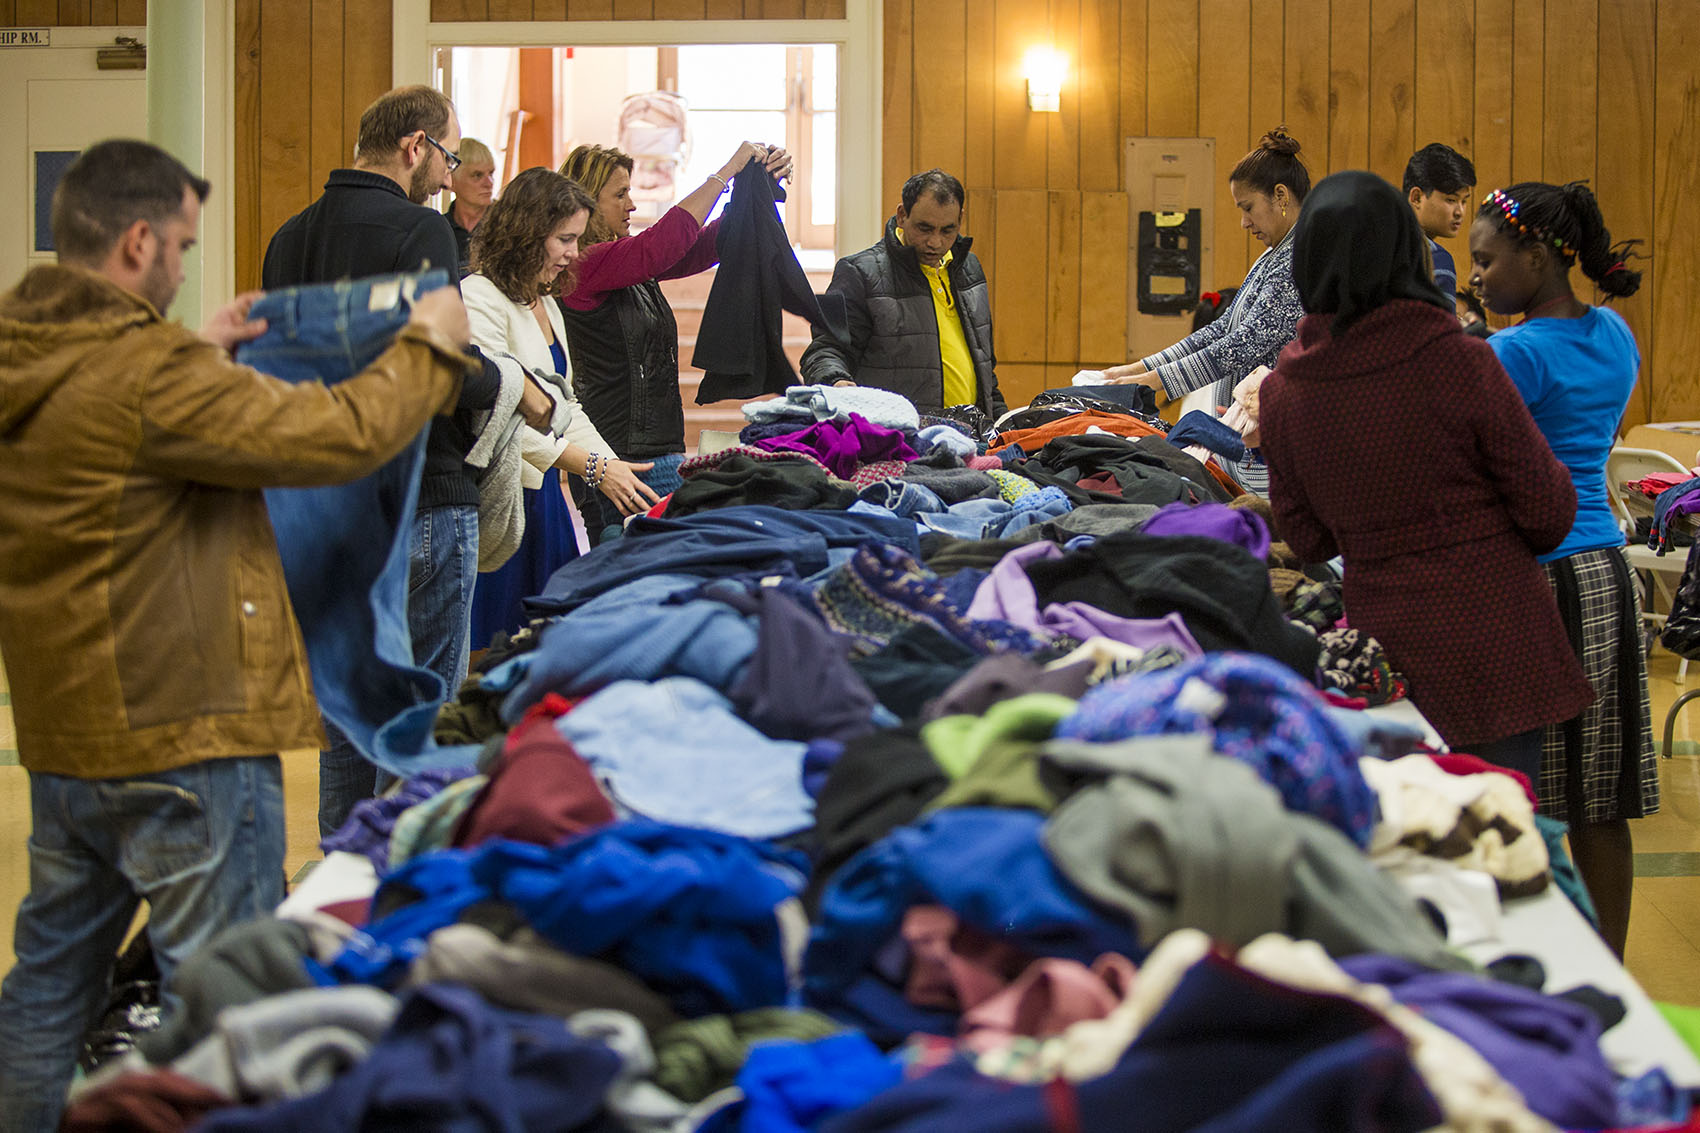 Refugees pick out items at a clothing drive at First United Baptist Church in Lowell. (Jesse Costa/WBUR)